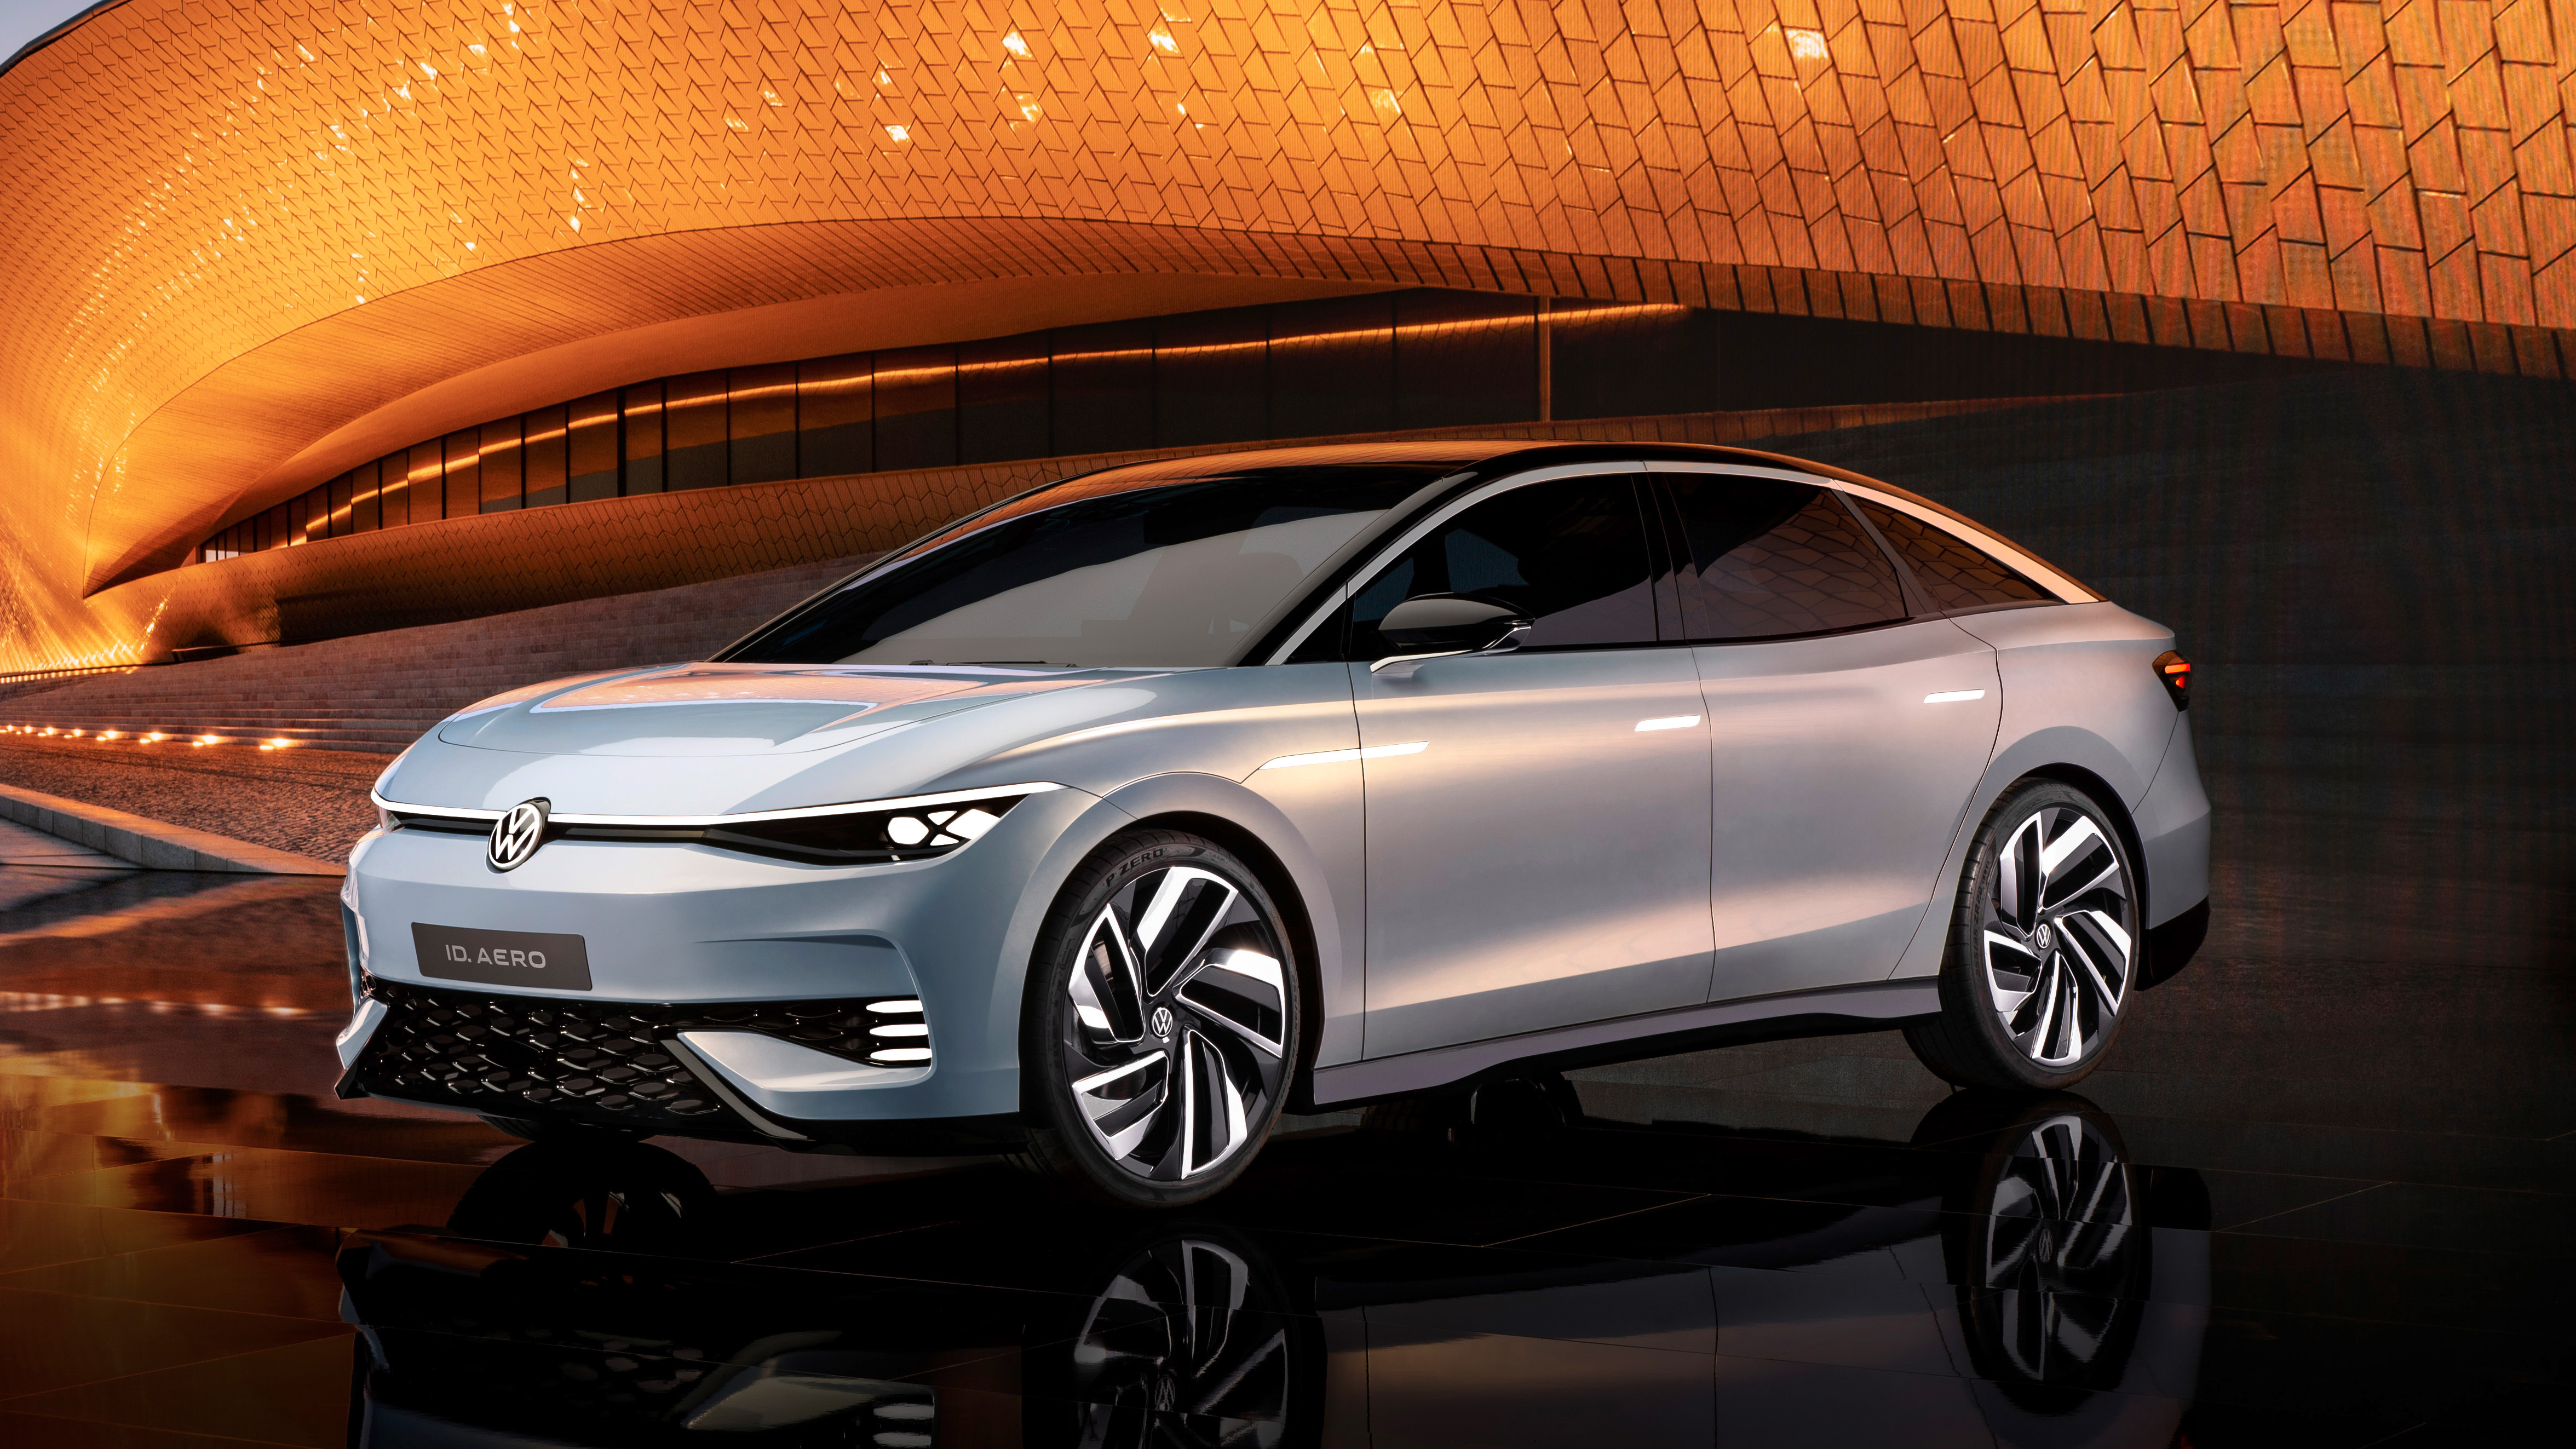 Volkswagen’s Next Electric Sedan, Voice-Enabled Parking, and a recall for the Ford Mustang Mach-E